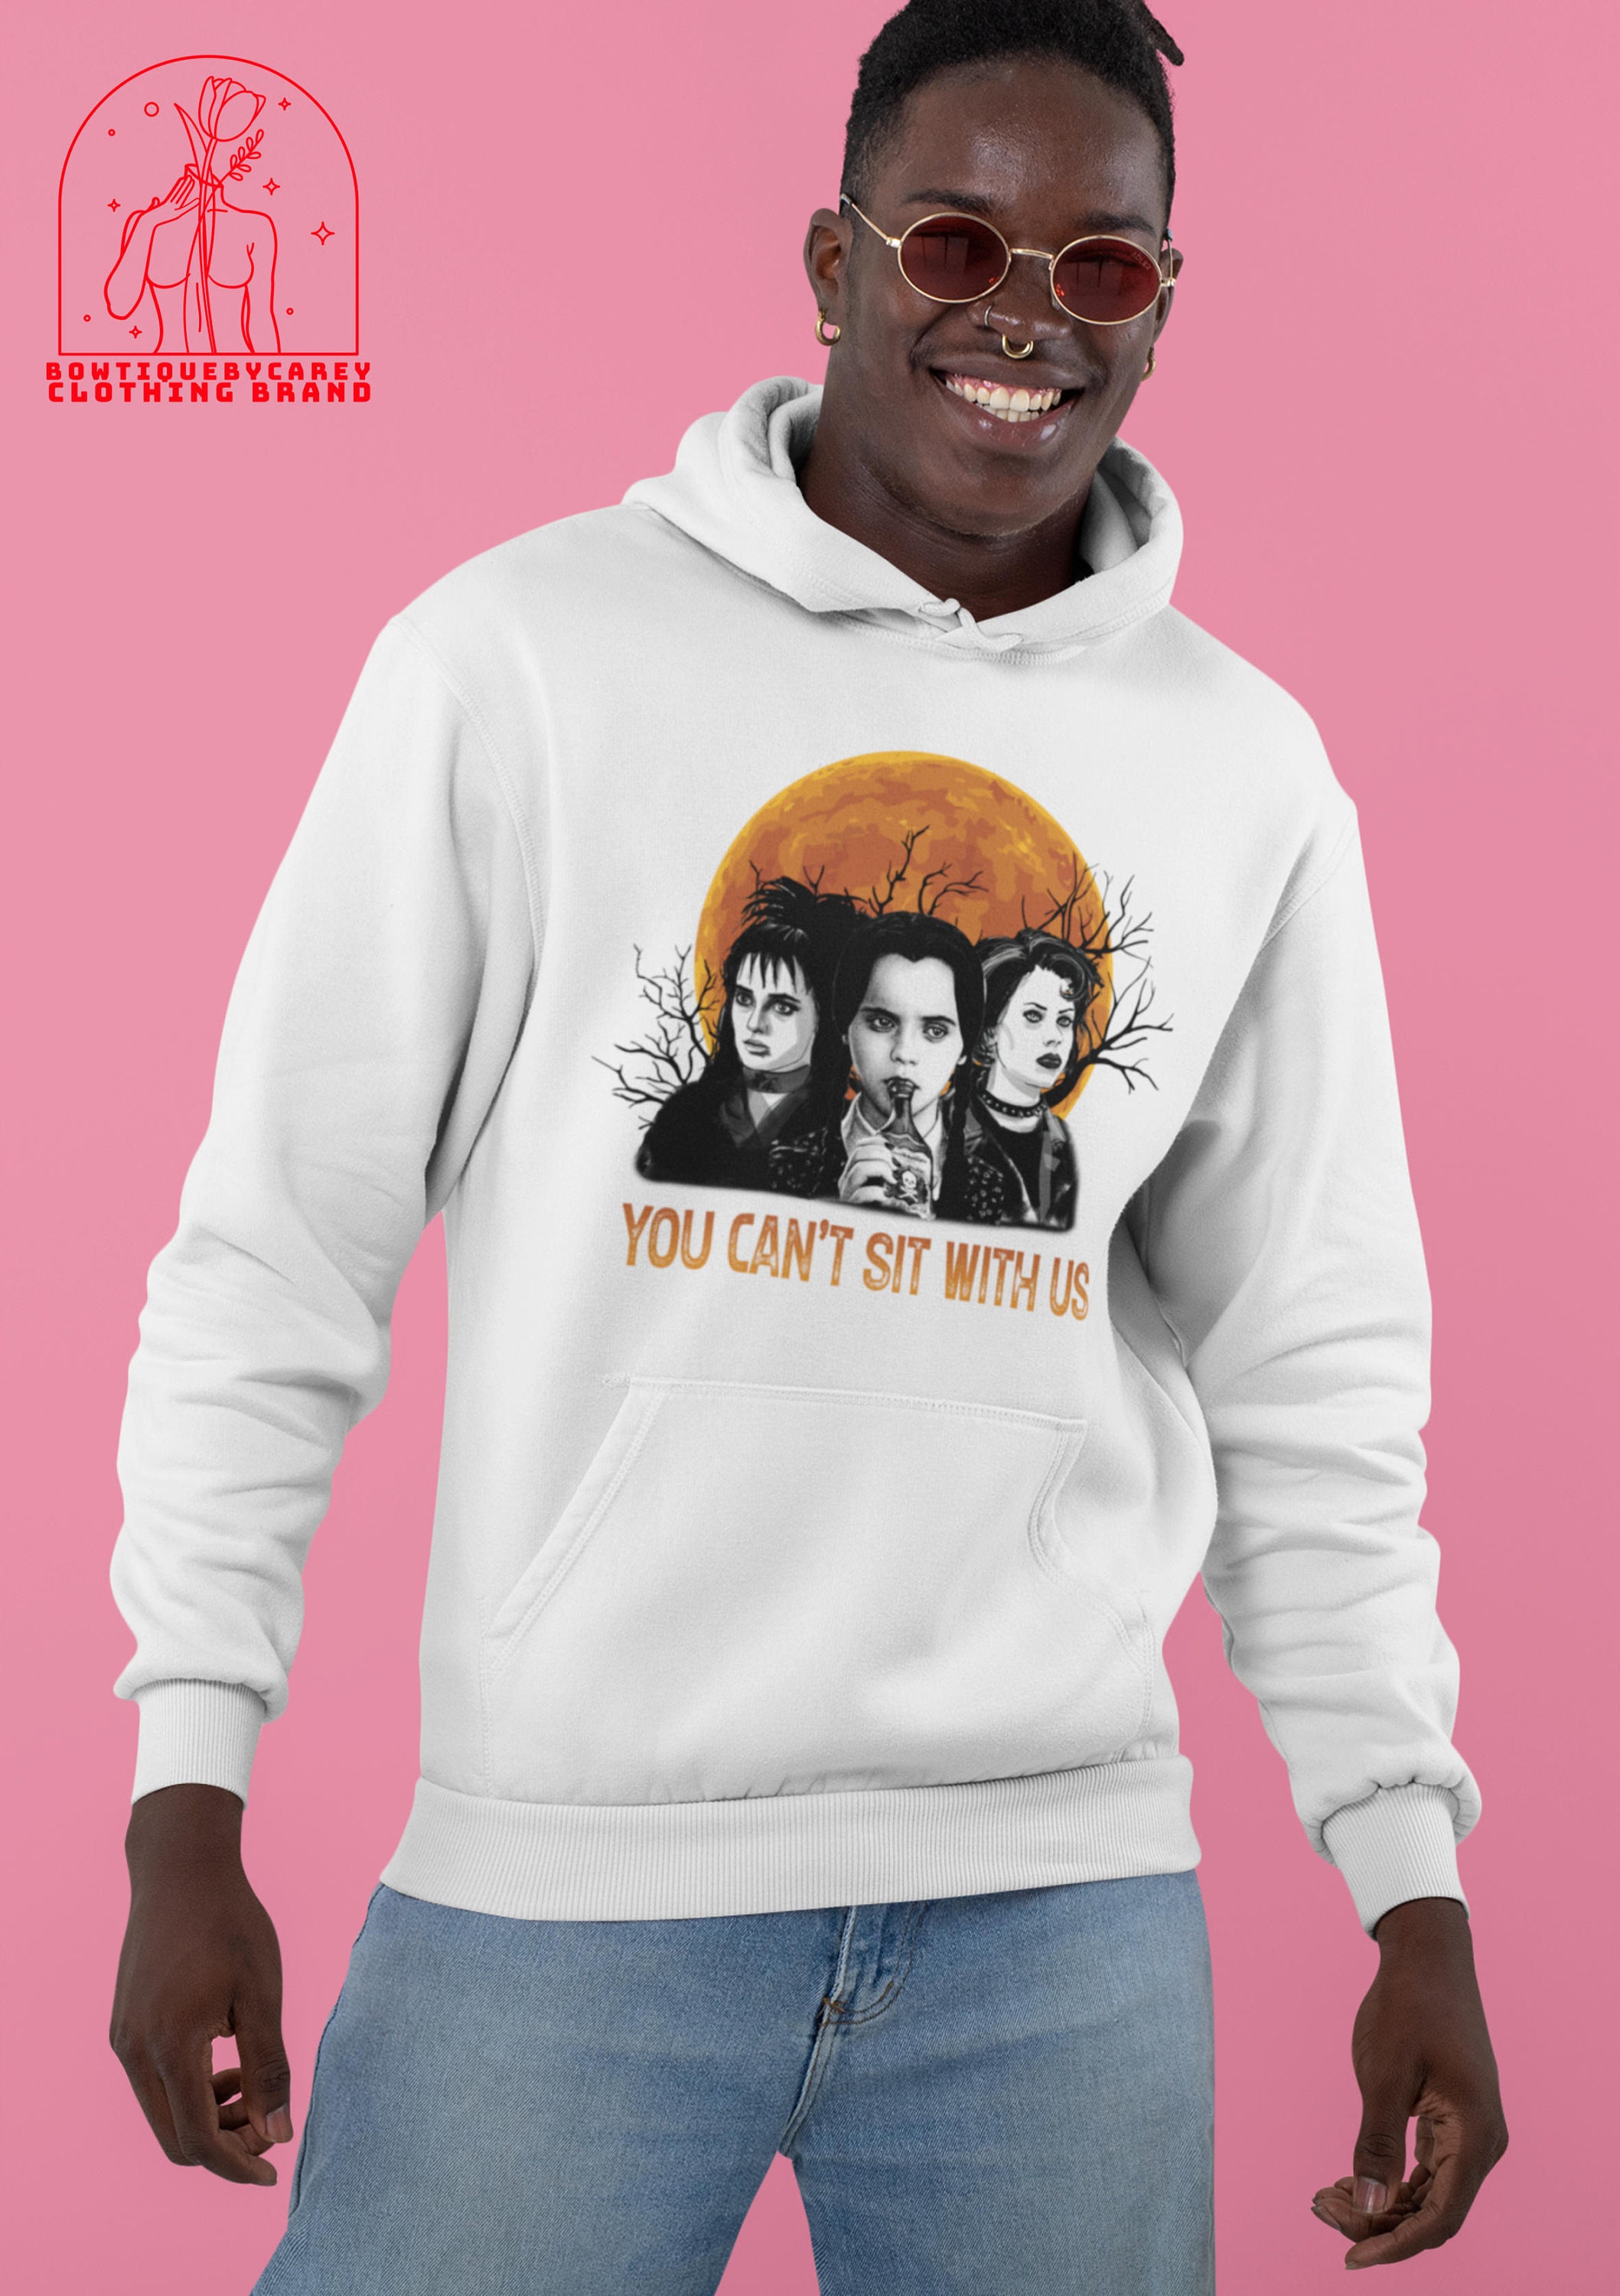 You Can’t Sit With Us Wednesday Addams And Friends The Addams Family Unisex T-Shirt